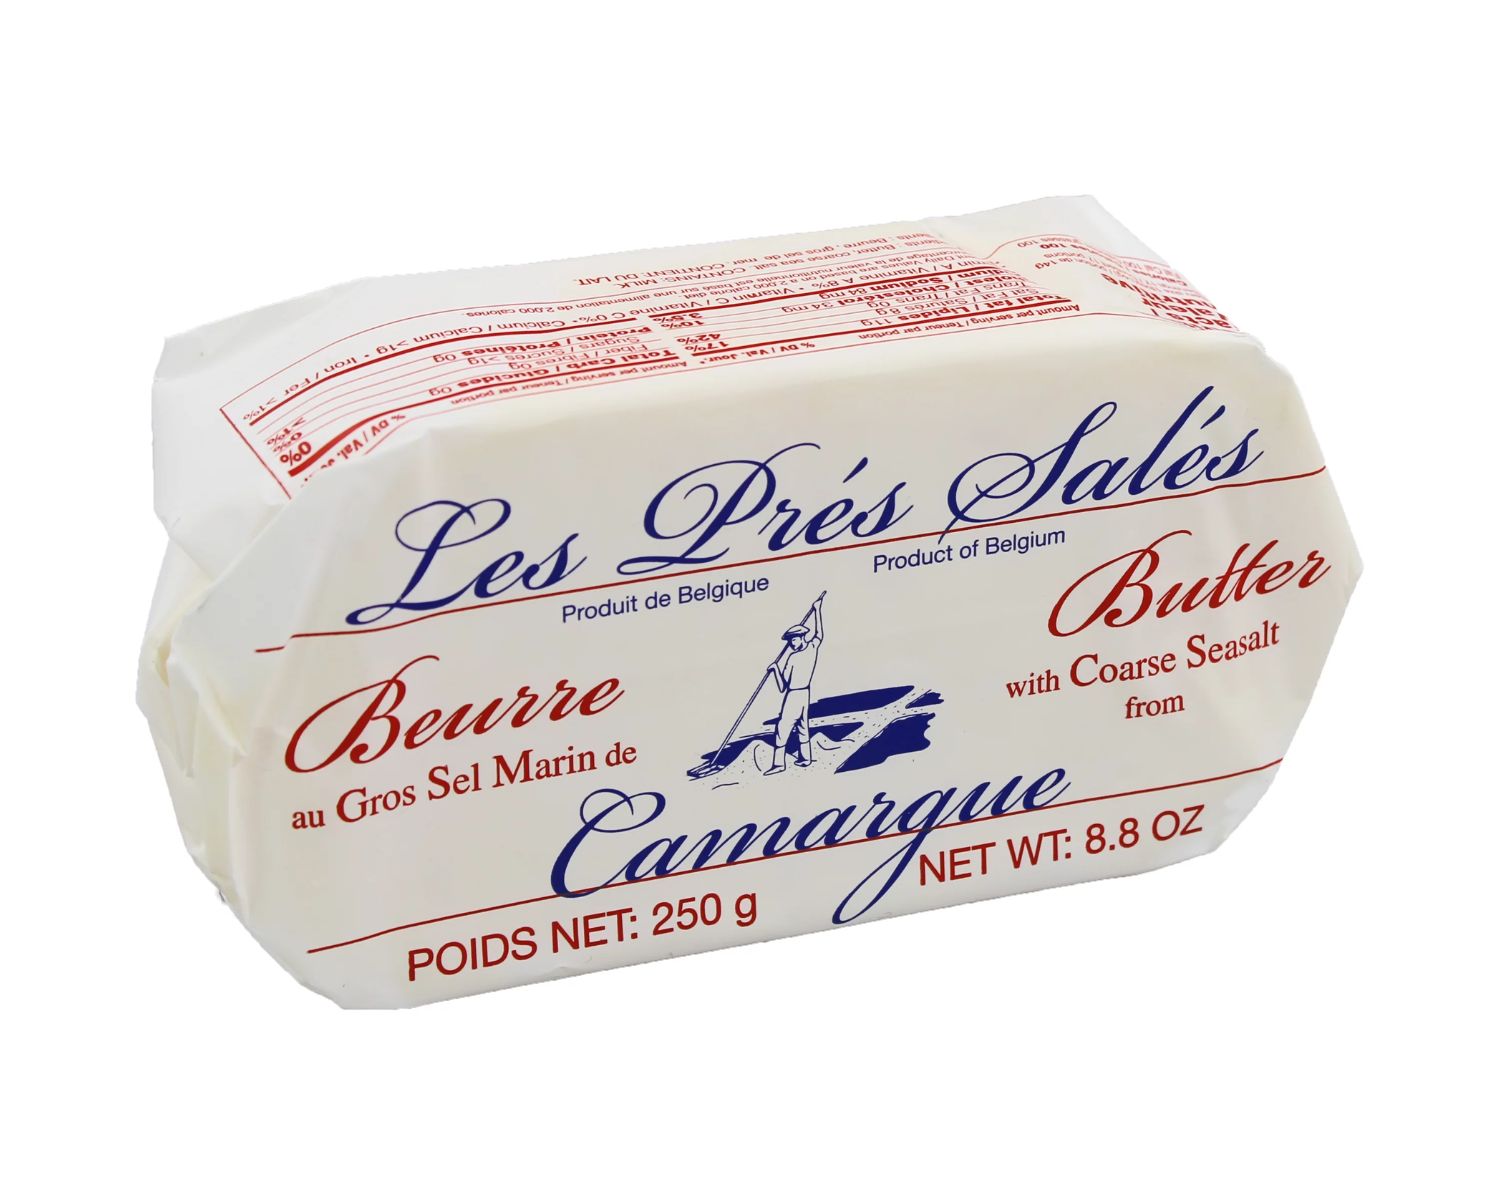 15-extraordinary-facts-about-les-pres-sales-butter